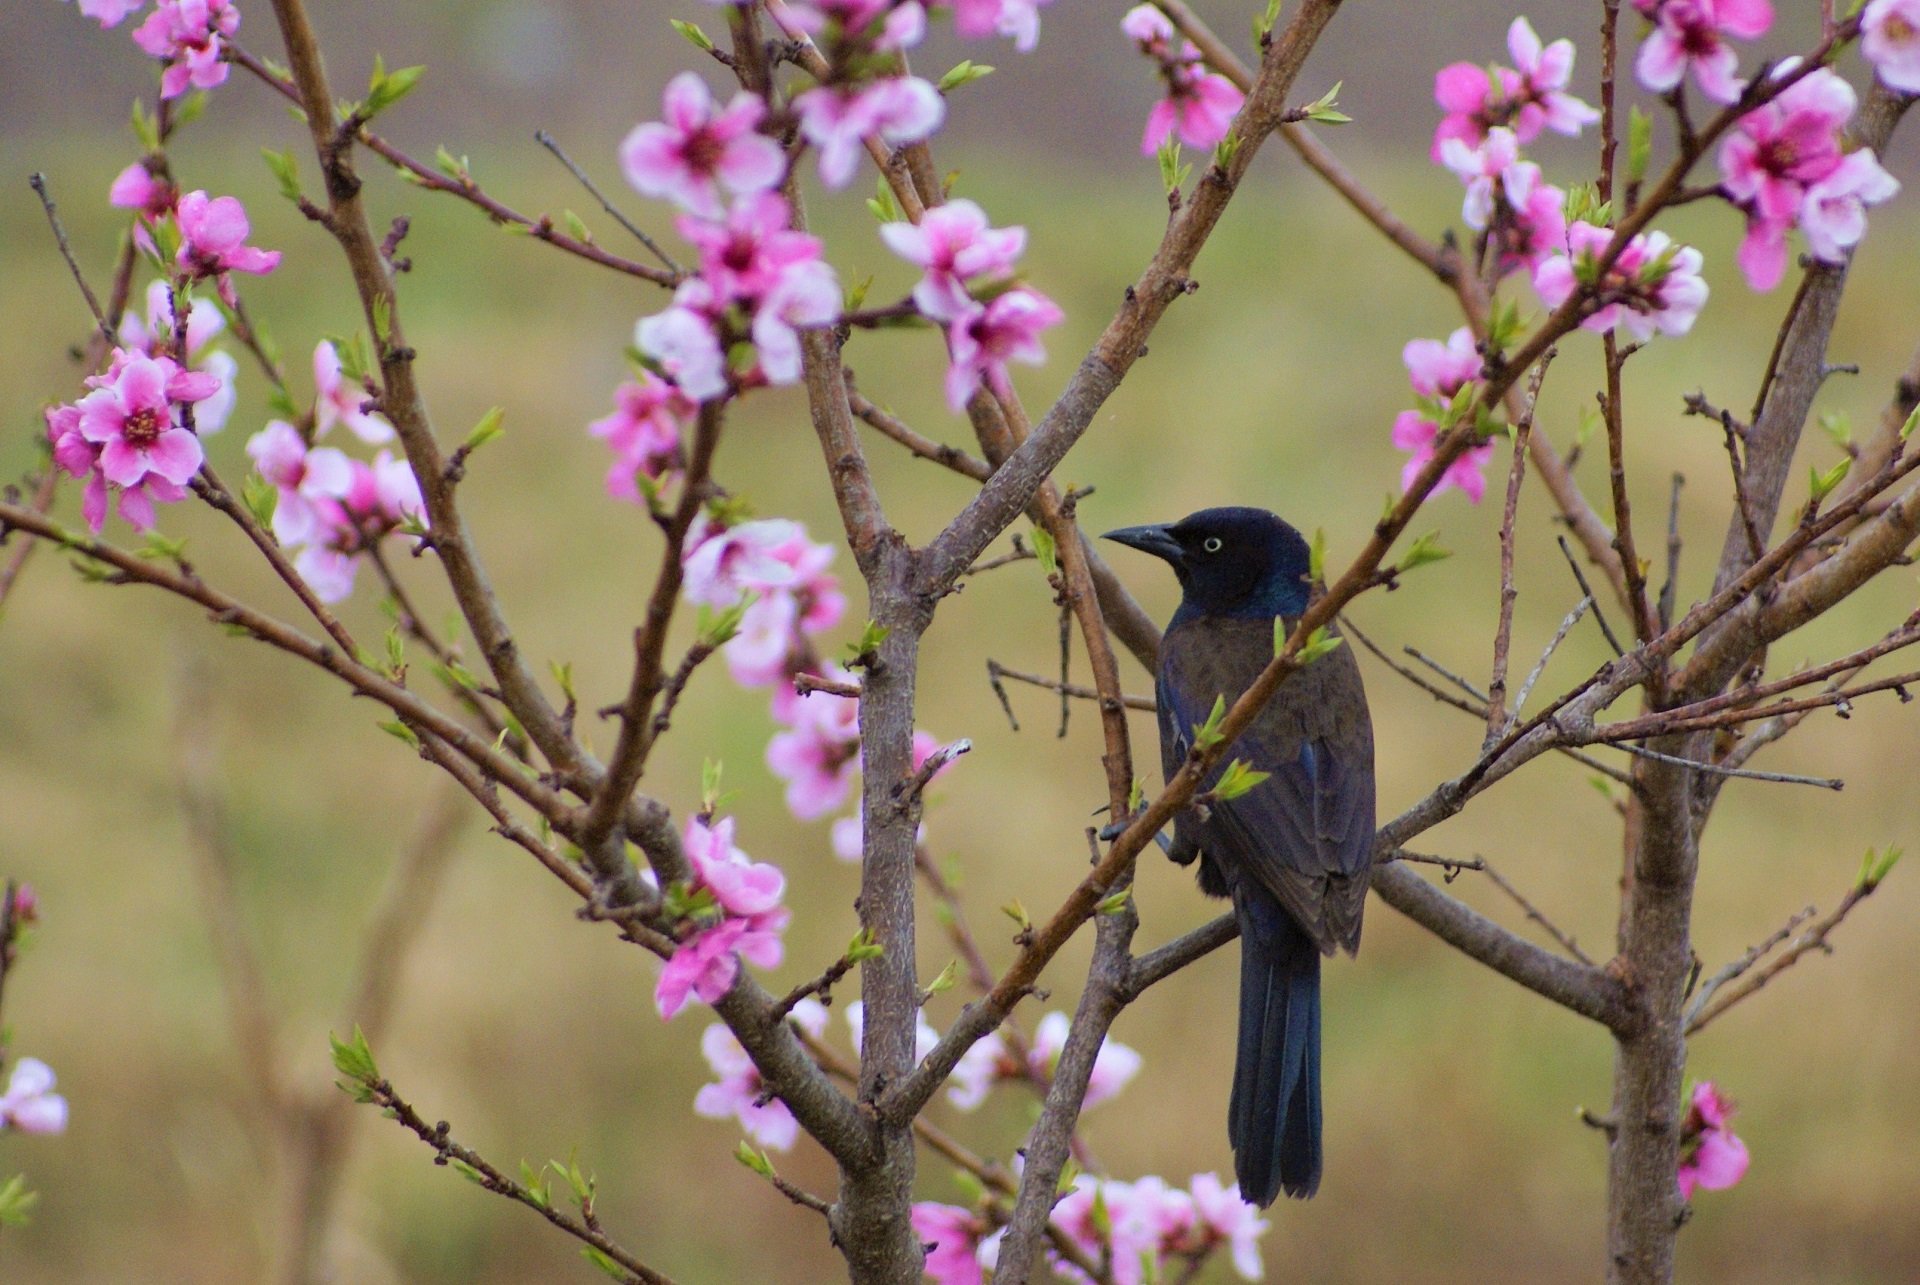 A Common Grackle perches amid pink blossoms in spring.